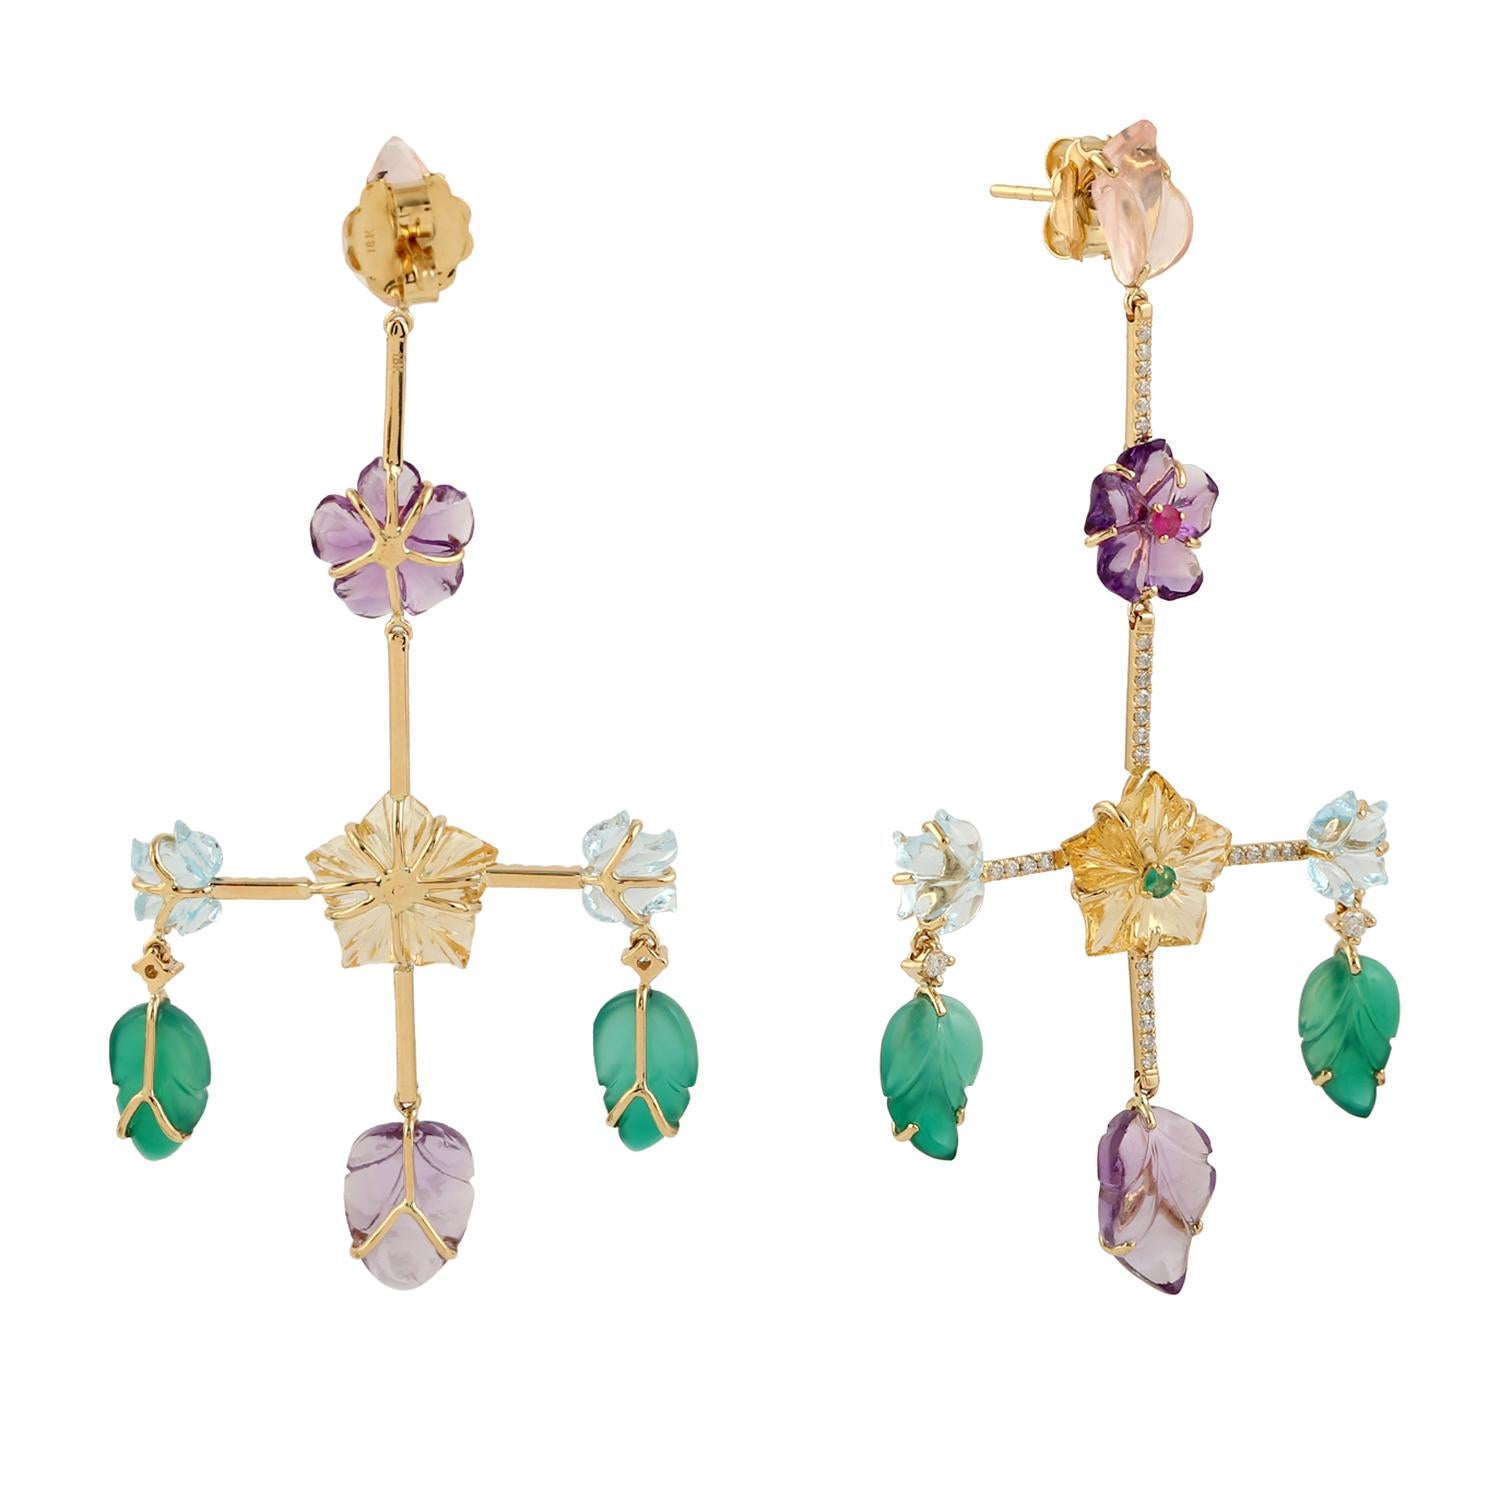 Cast in 14-karat gold. These beautiful earrings are set with 37.0 carats of carved multi gemstone, emerald, topaz, amethyst, citrine, ruby and .47 carats of sparkling diamonds.  See other flower collection matching pieces.

FOLLOW  MEGHNA JEWELS